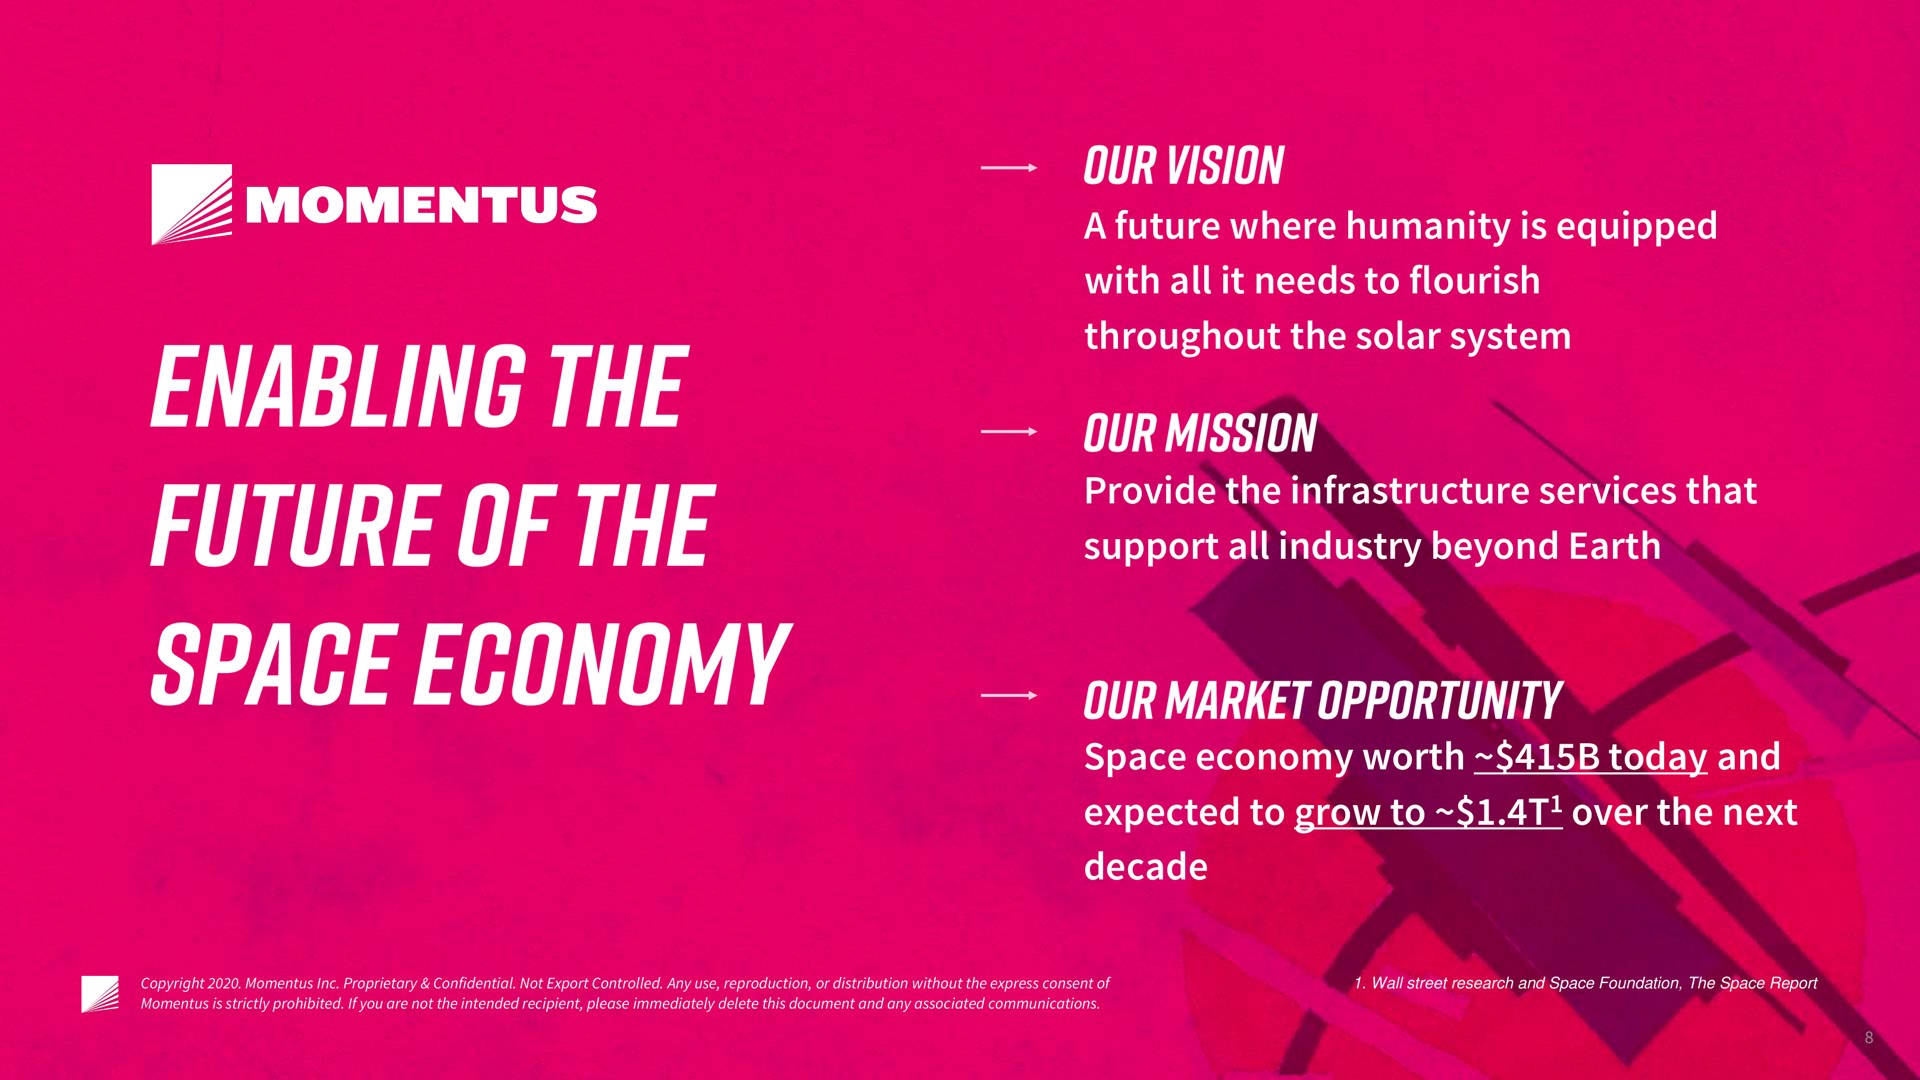 a future where humanity is equipped with all it needs to flourish throughout the solar system provide the infrastructure services that support all industry beyond earth space economy worth today and expected to grow to over the next decade enabling of an | Momentus